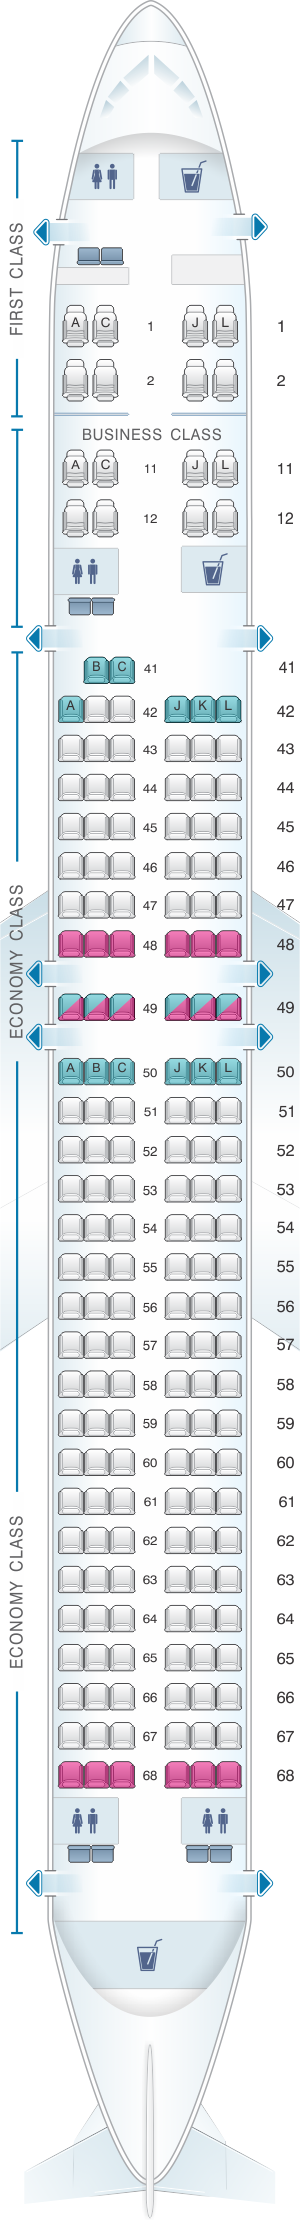 Seat map for Xiamen Airlines Boeing B757 200 180pax